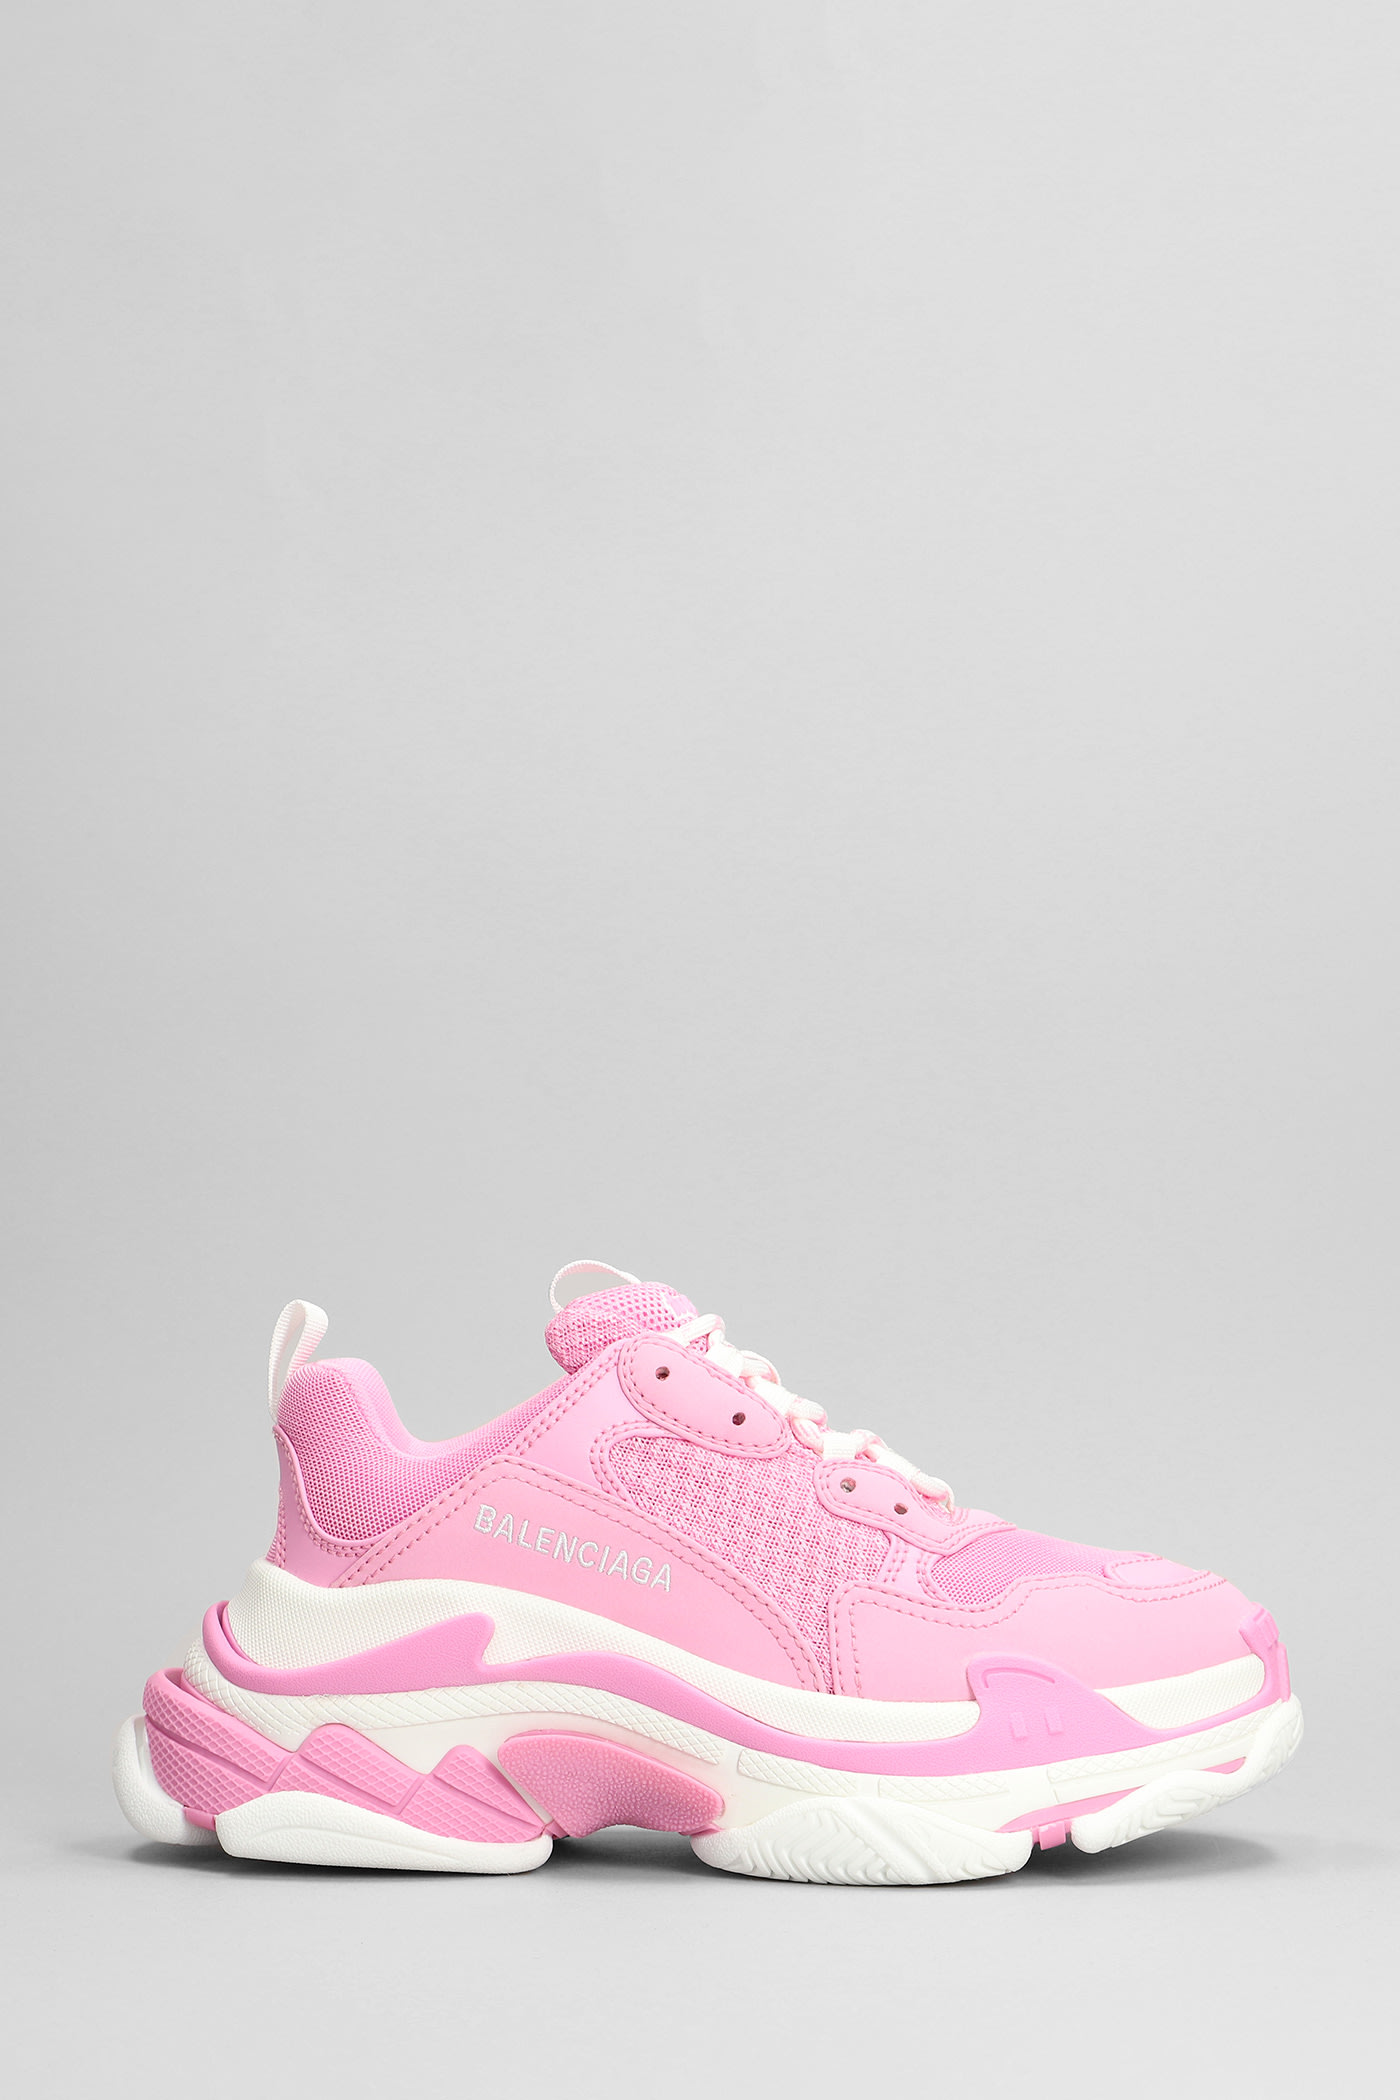 BALENCIAGA TRIPLE S SNEAKERS IN ROSE-PINK POLYESTER